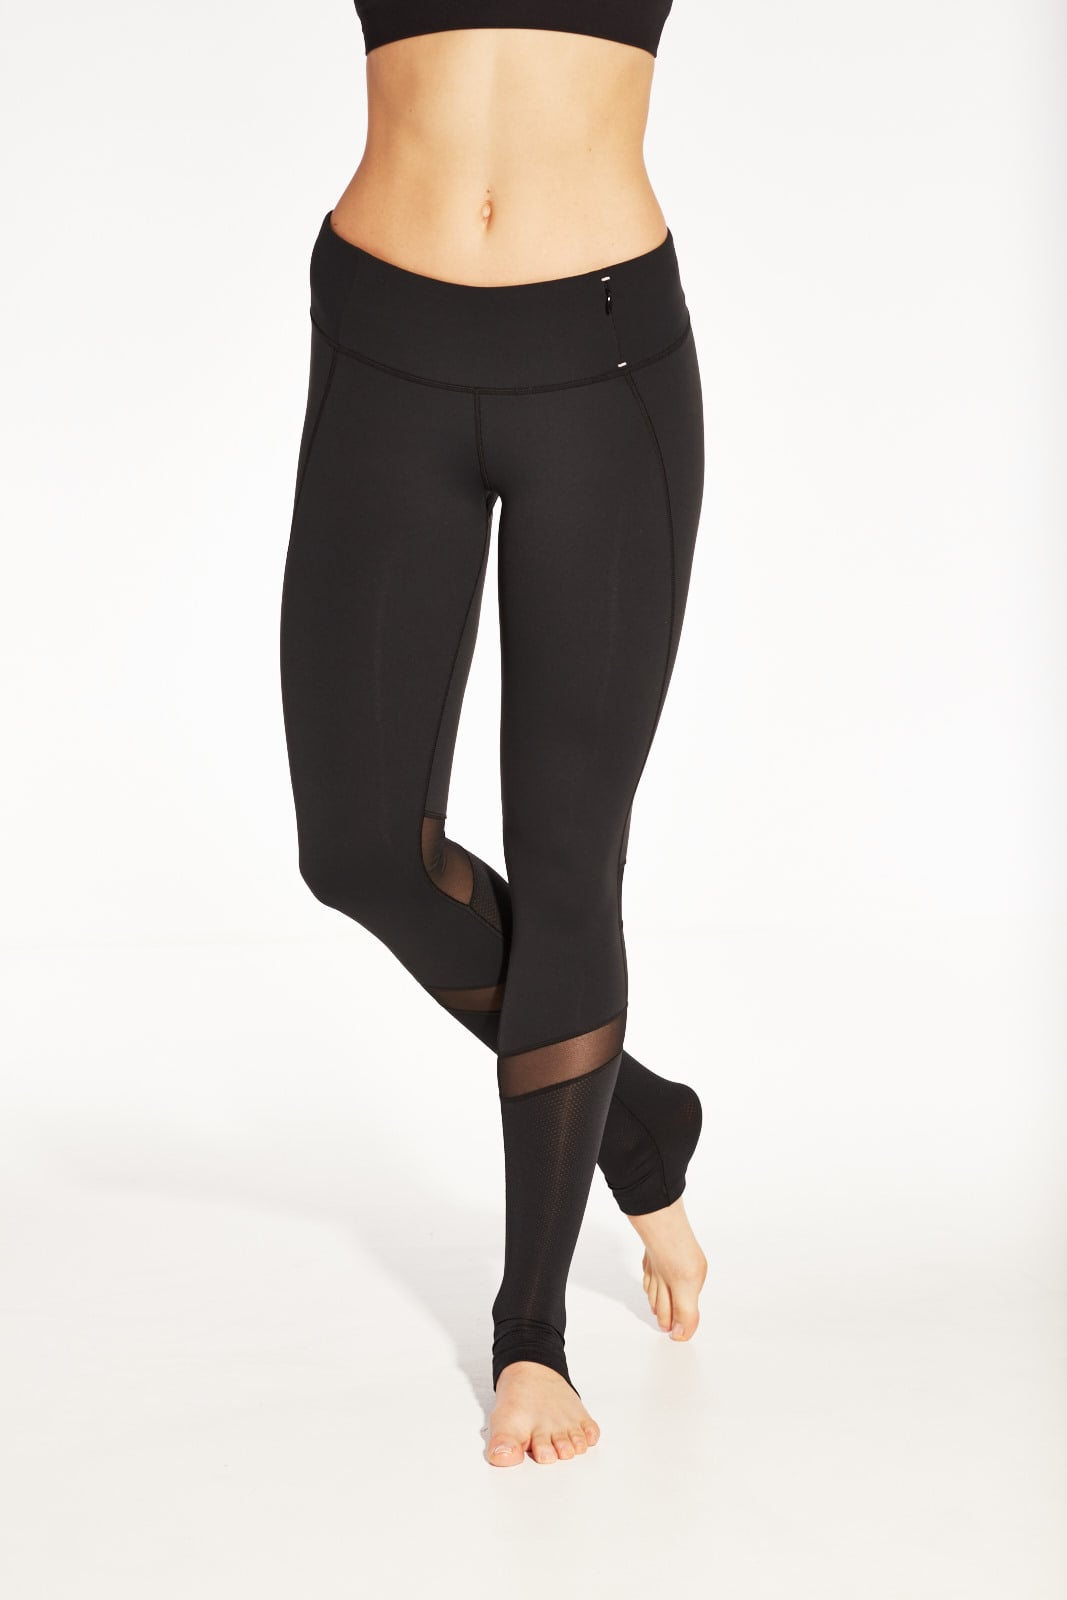 Calia by Carrie cold weather tights review 2 - Agent Athletica